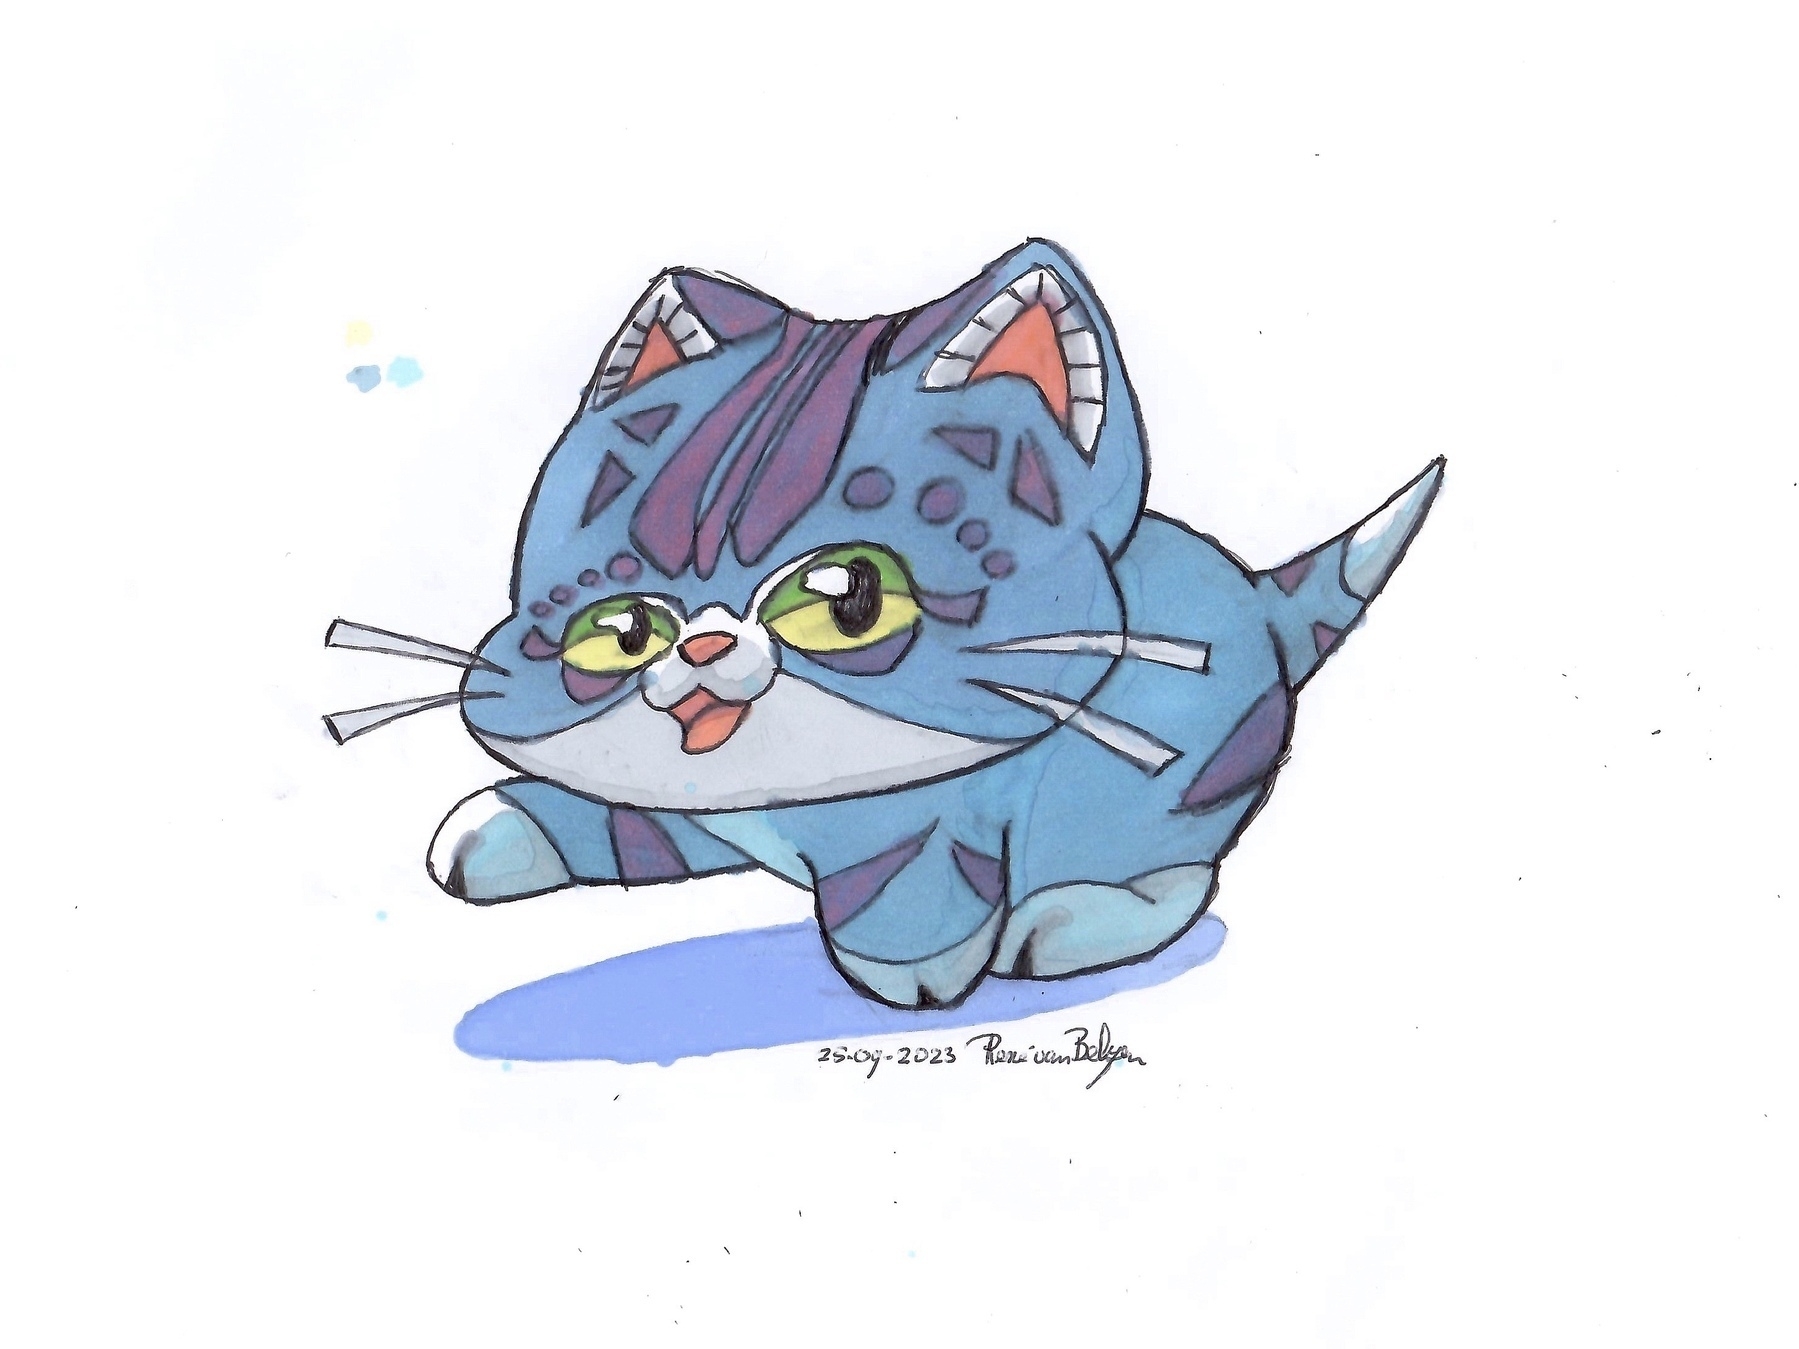 colored pen drawing of a stylized cat